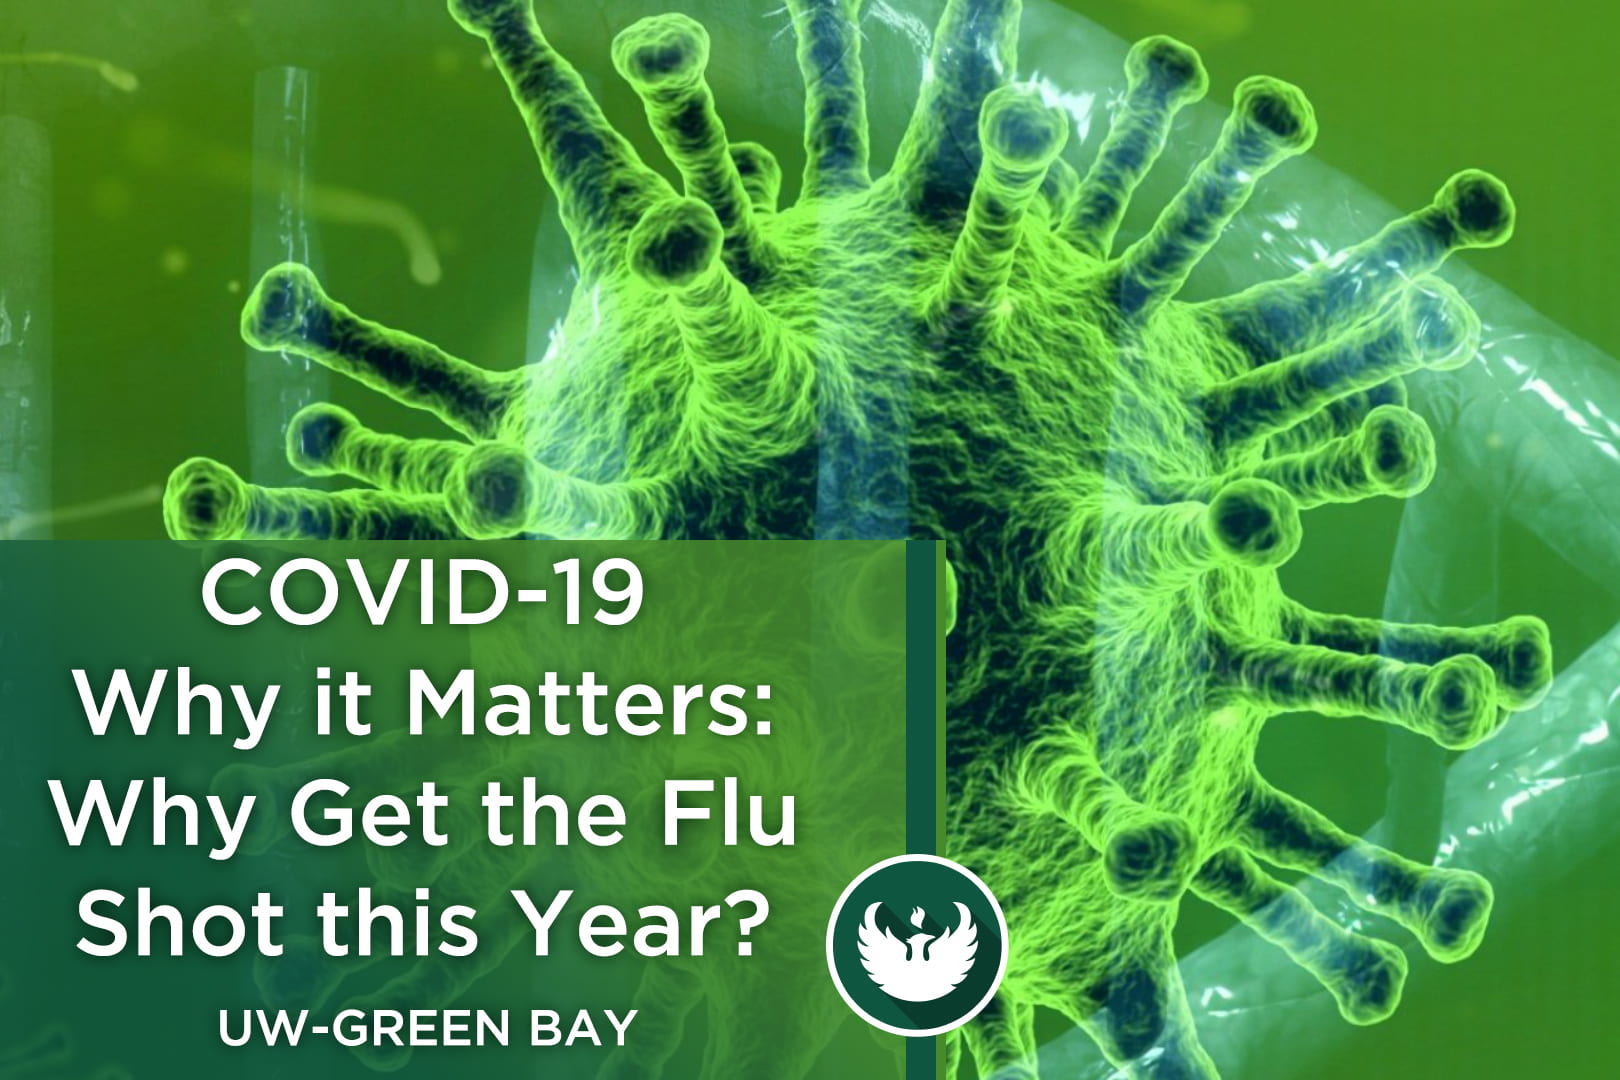 Photo of the covid-19 virus under a microscope with the words, "COVID-19 Why it Matters, Part 8: Why does everyone need a flu shot this year?"